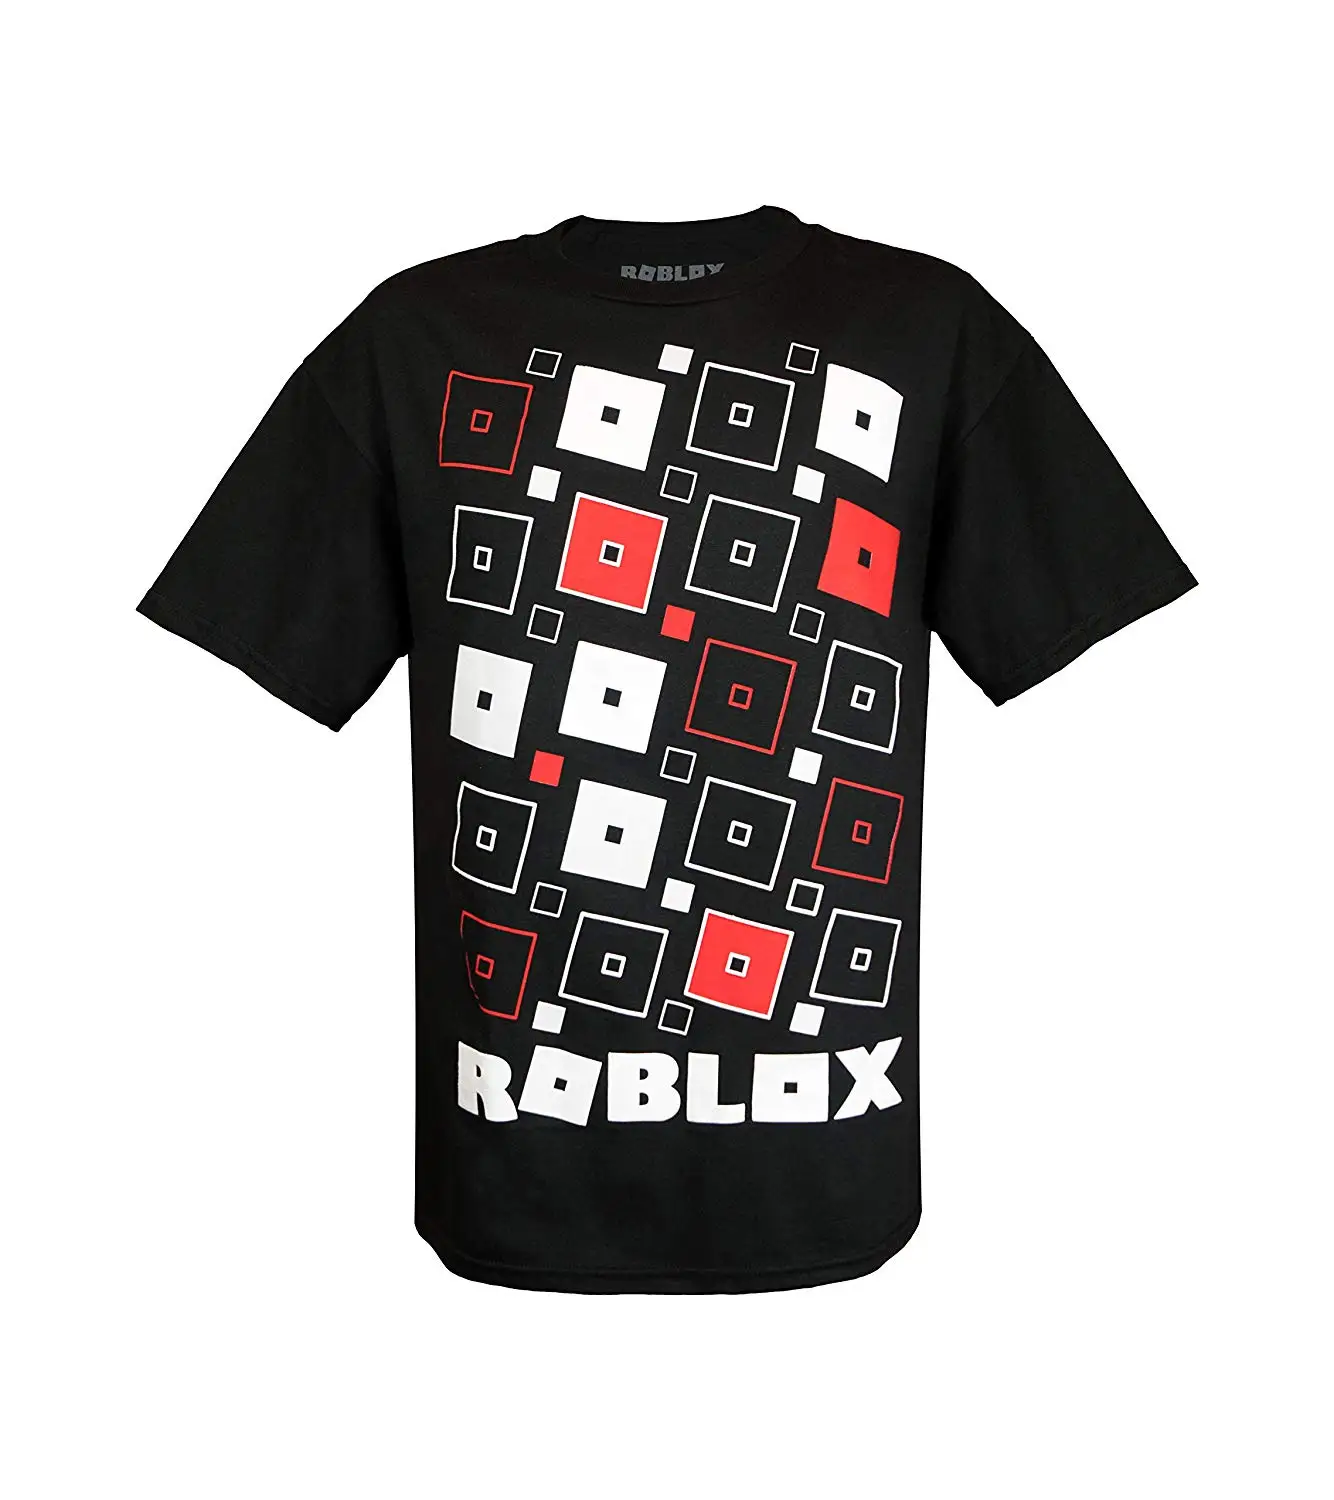 Buy Roblox Game Play With Builderman Character Glow In The Dark For Young Kids Boys And Girls Black Tshirt Tee Medium In Cheap Price On Alibaba Com - roblox t shirt buy roblox t shirt with free shipping on aliexpress version